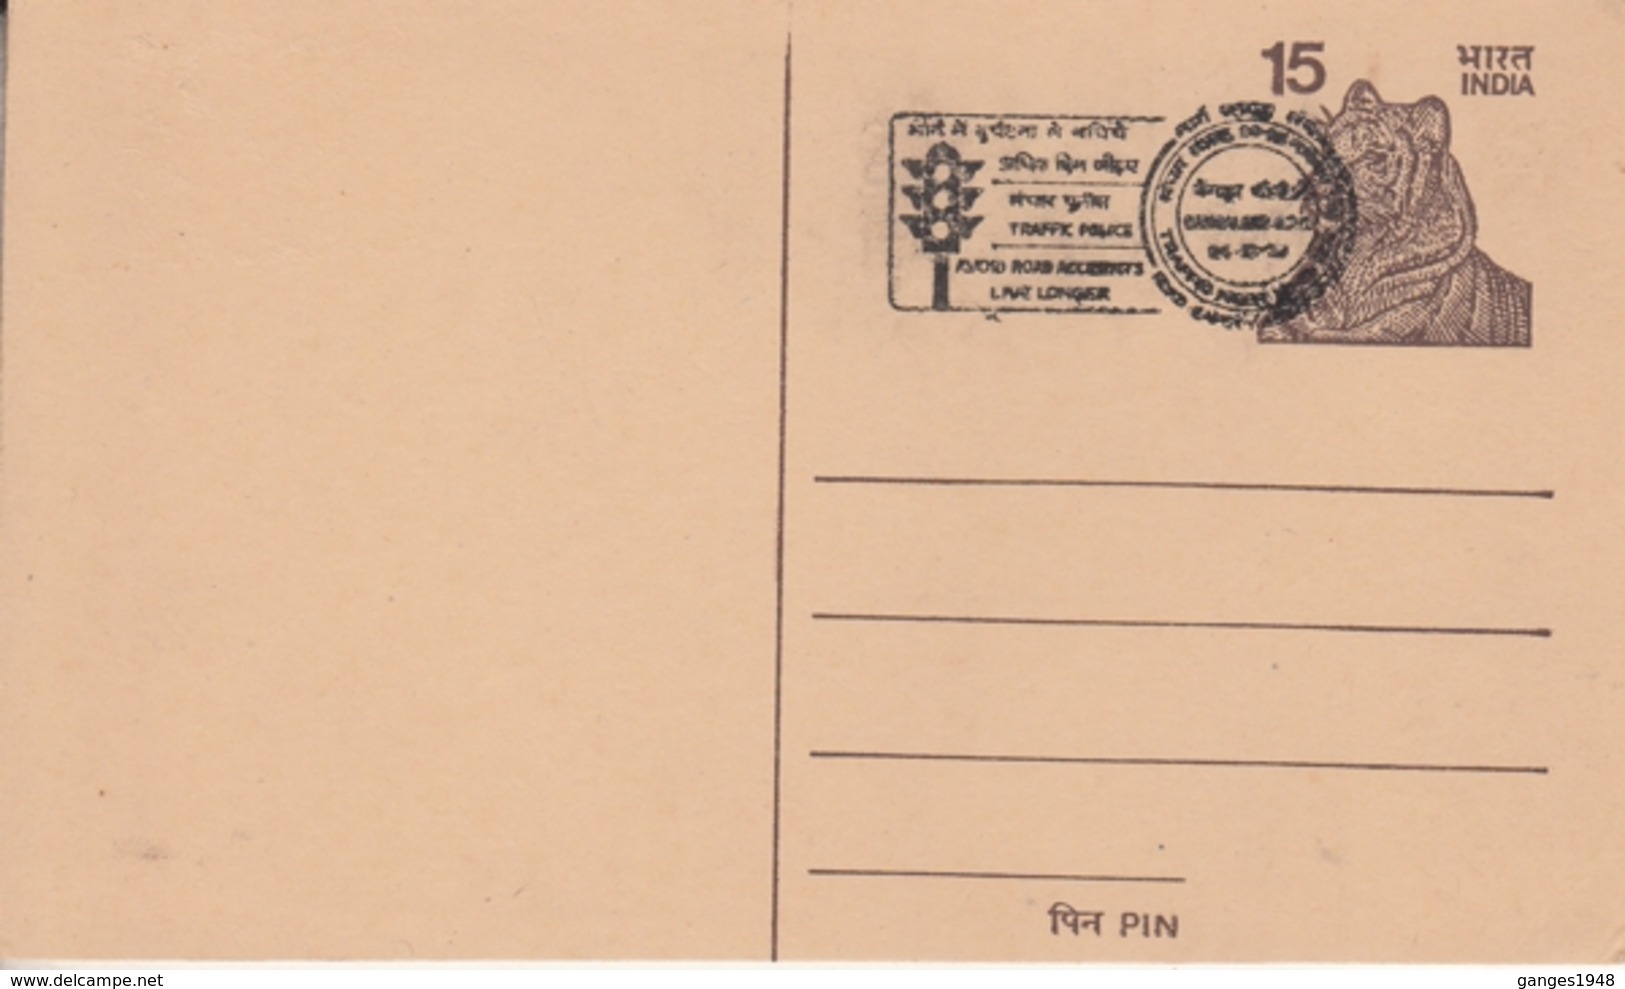 India 1970's  Trffic Police  Road Safety  Bangalore Cancellation Post Card  # 18142  D  Inde Indien - Police - Gendarmerie